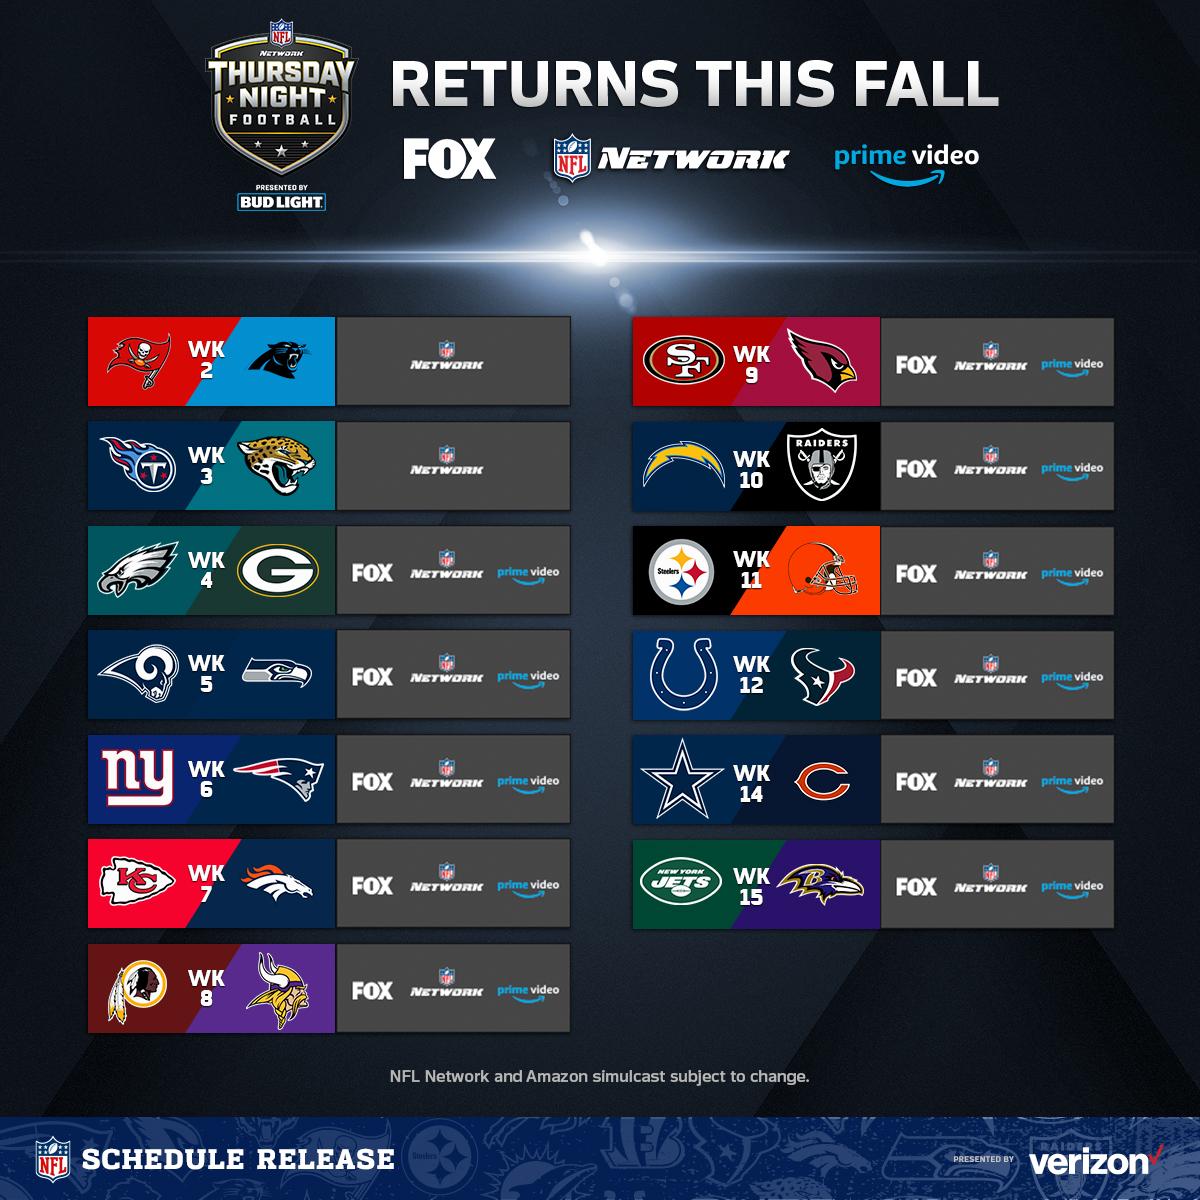 NFL Network on Twitter: "The 2019 NFL schedule is out! 🏈🎉 Here are all